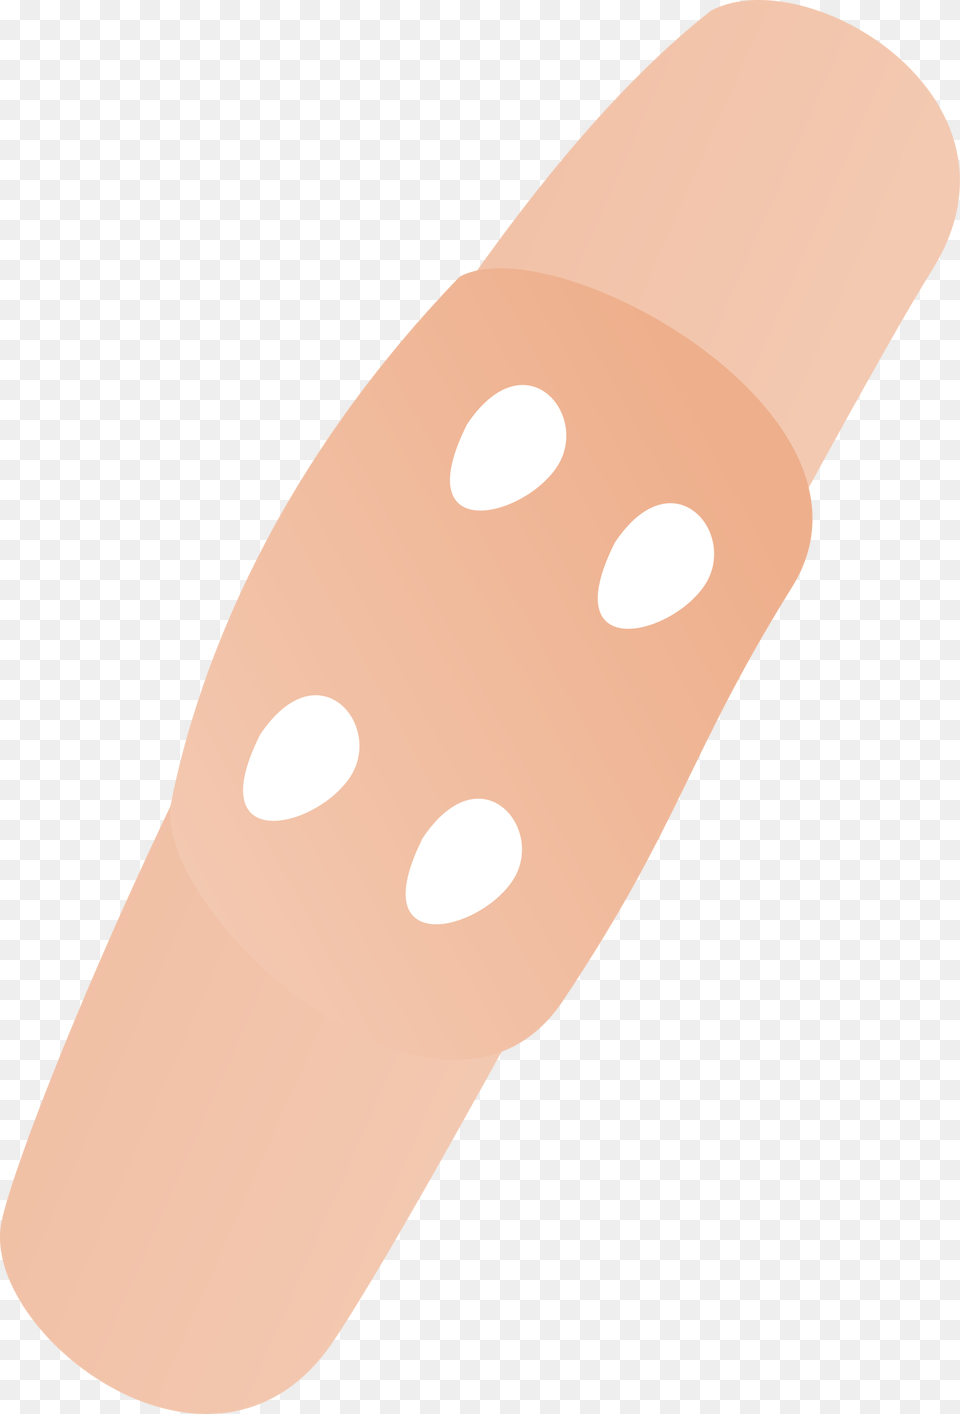 Clipart, Bandage, First Aid, Nature, Outdoors Png